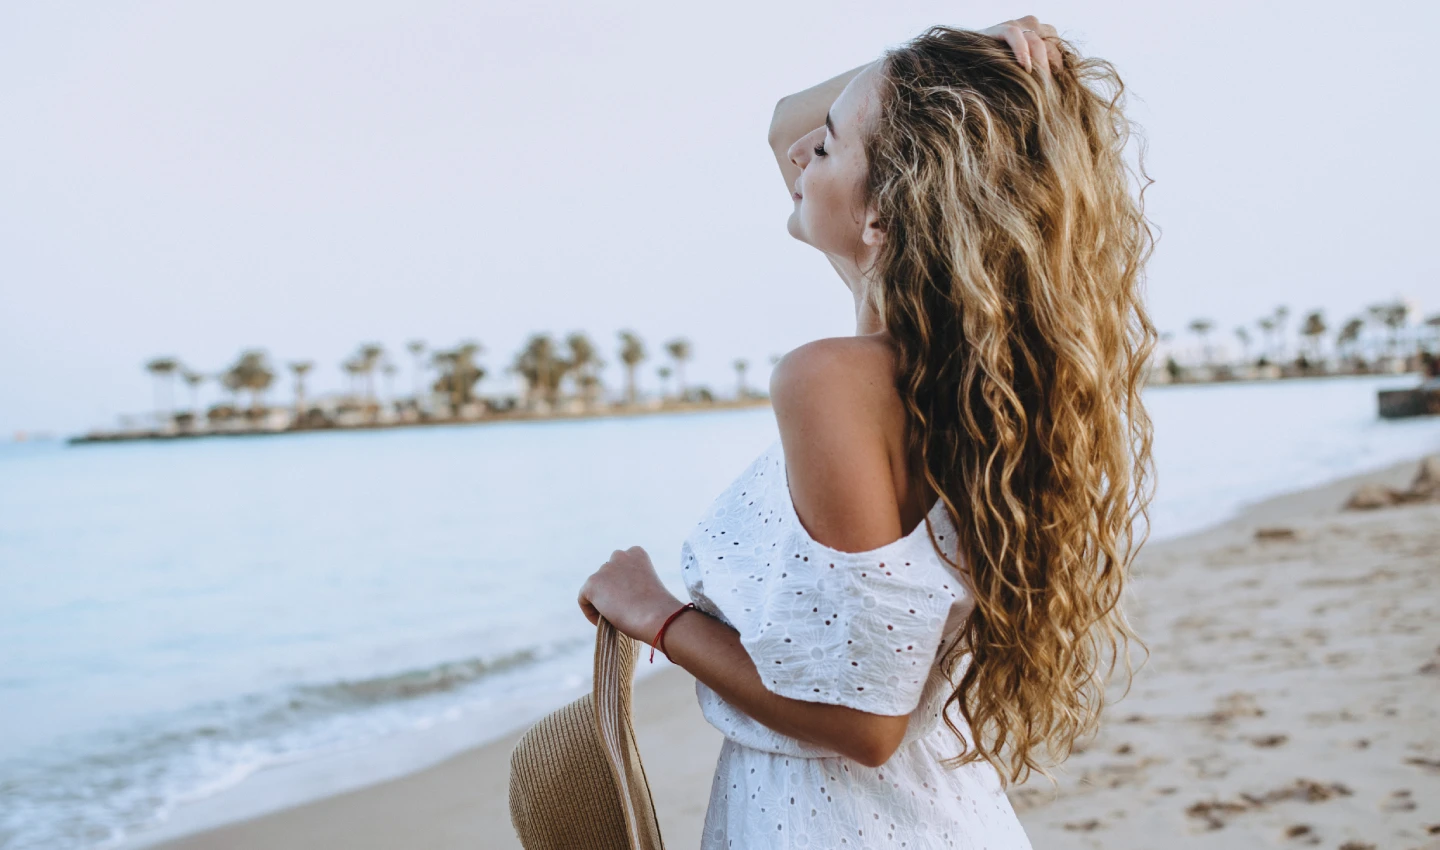 A young woman showcasing her radiant balayage hair, looking out over the sea, exemplifying the balayage hair trend in Australia